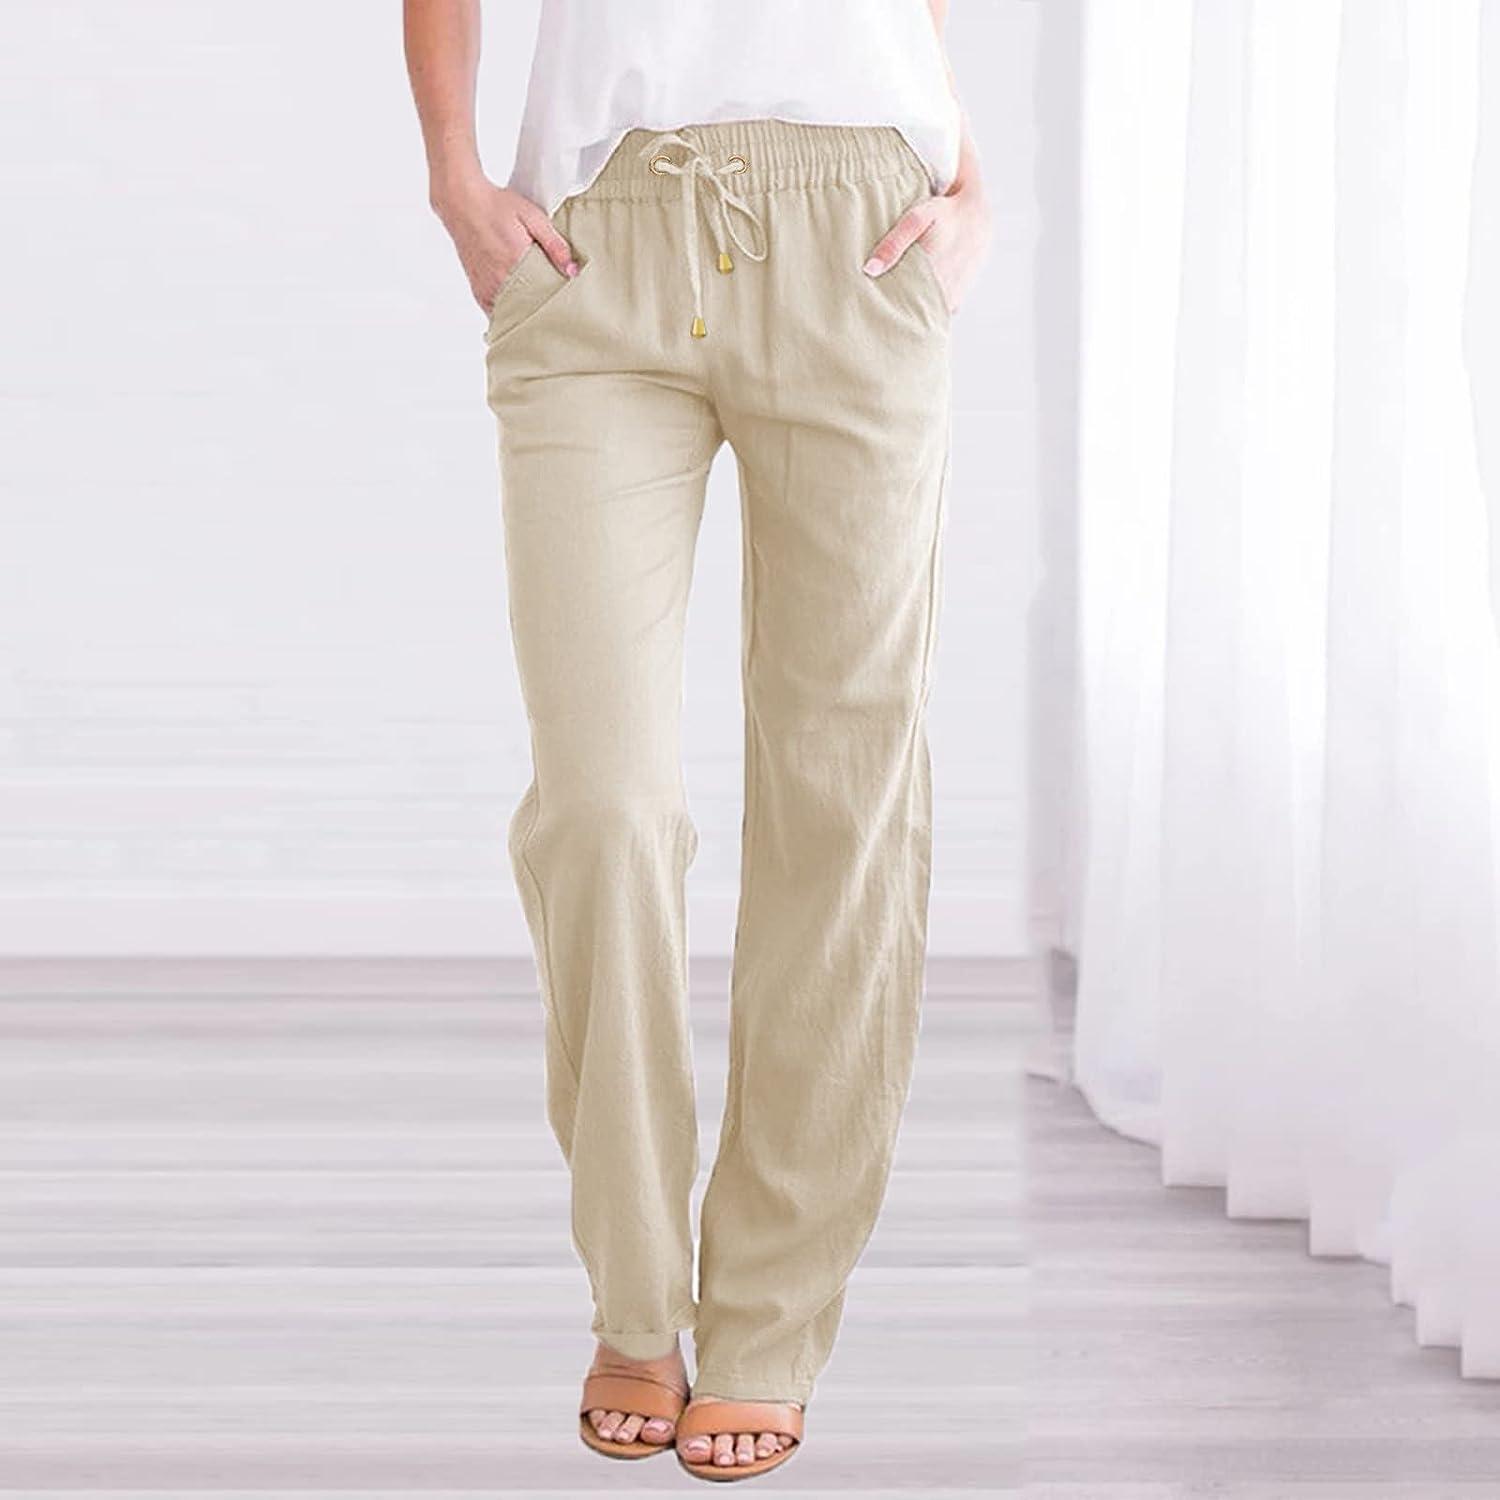 Women's comfortable trousers BERNICE NO-4814OR for only 49.9 € | NORTHFINDER